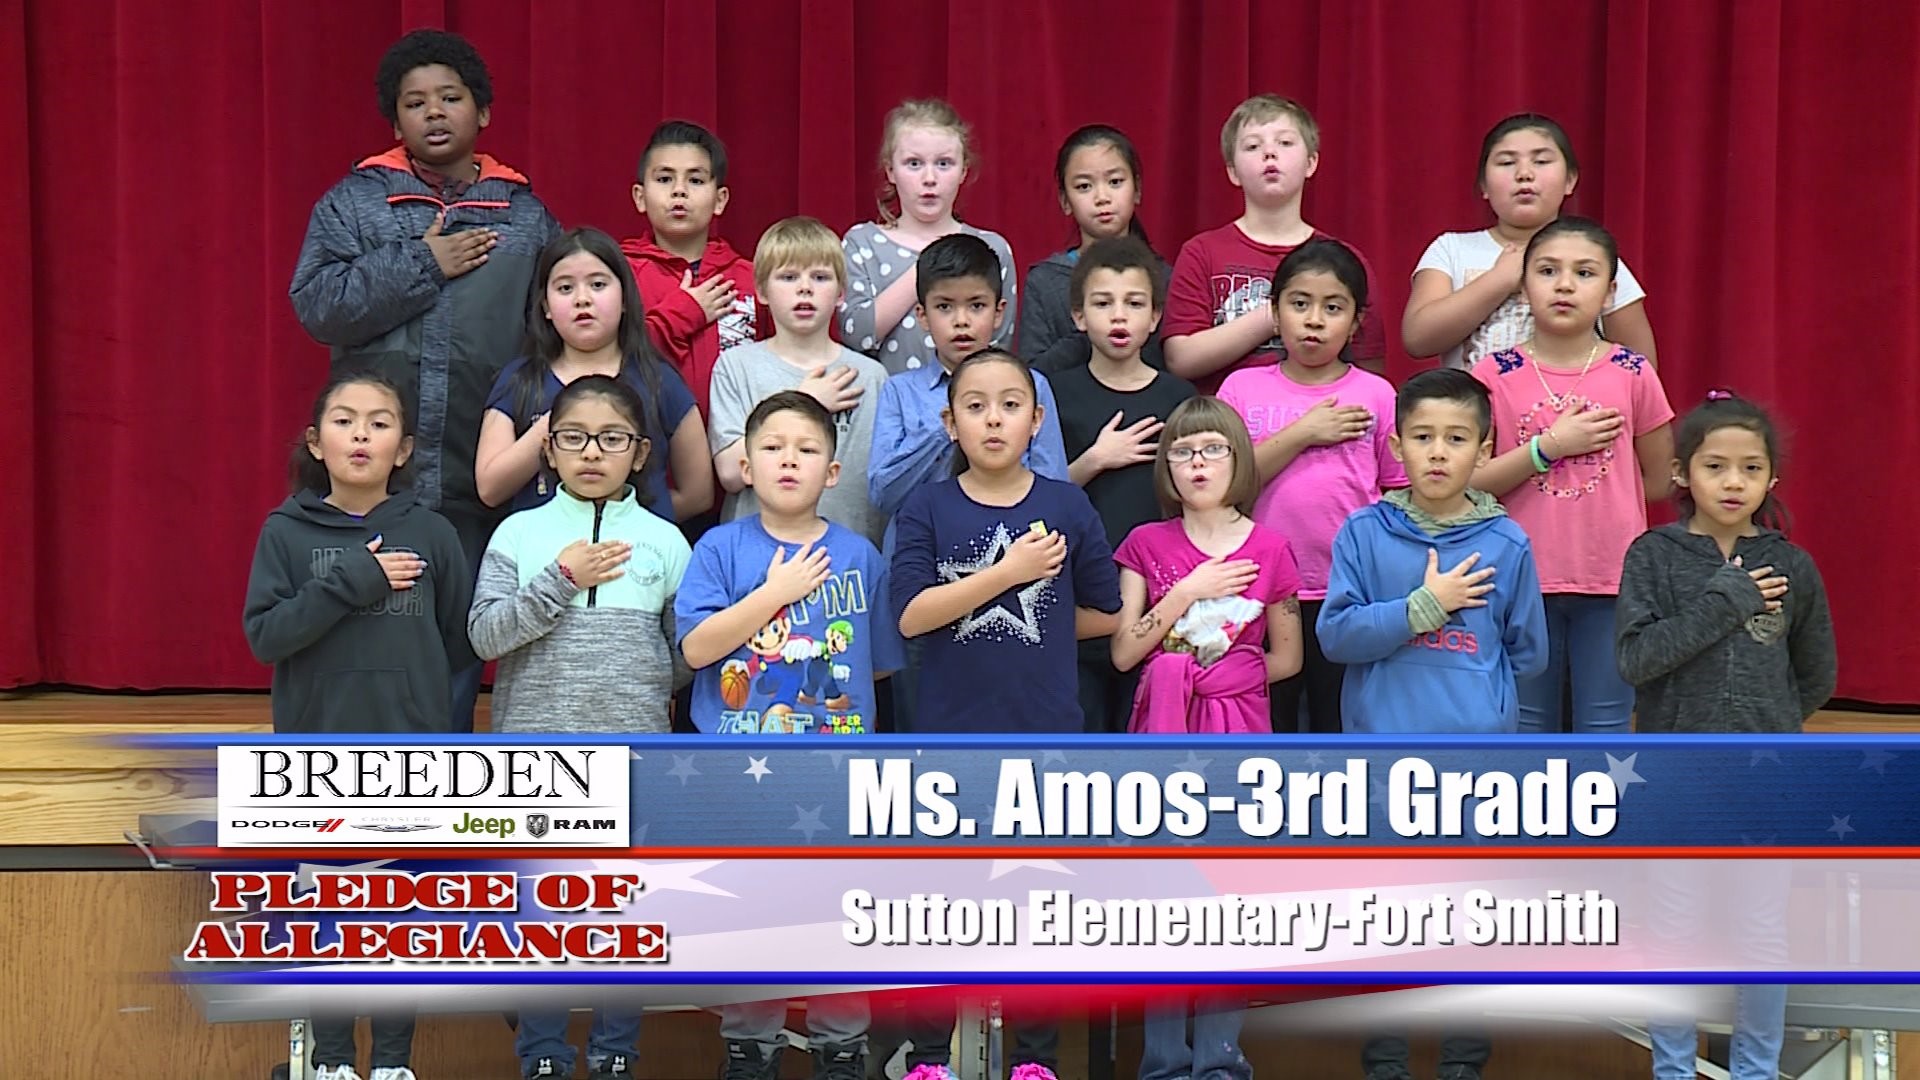 Ms. Amos  3rd Grade  Sutton Elementary  Fort Smith